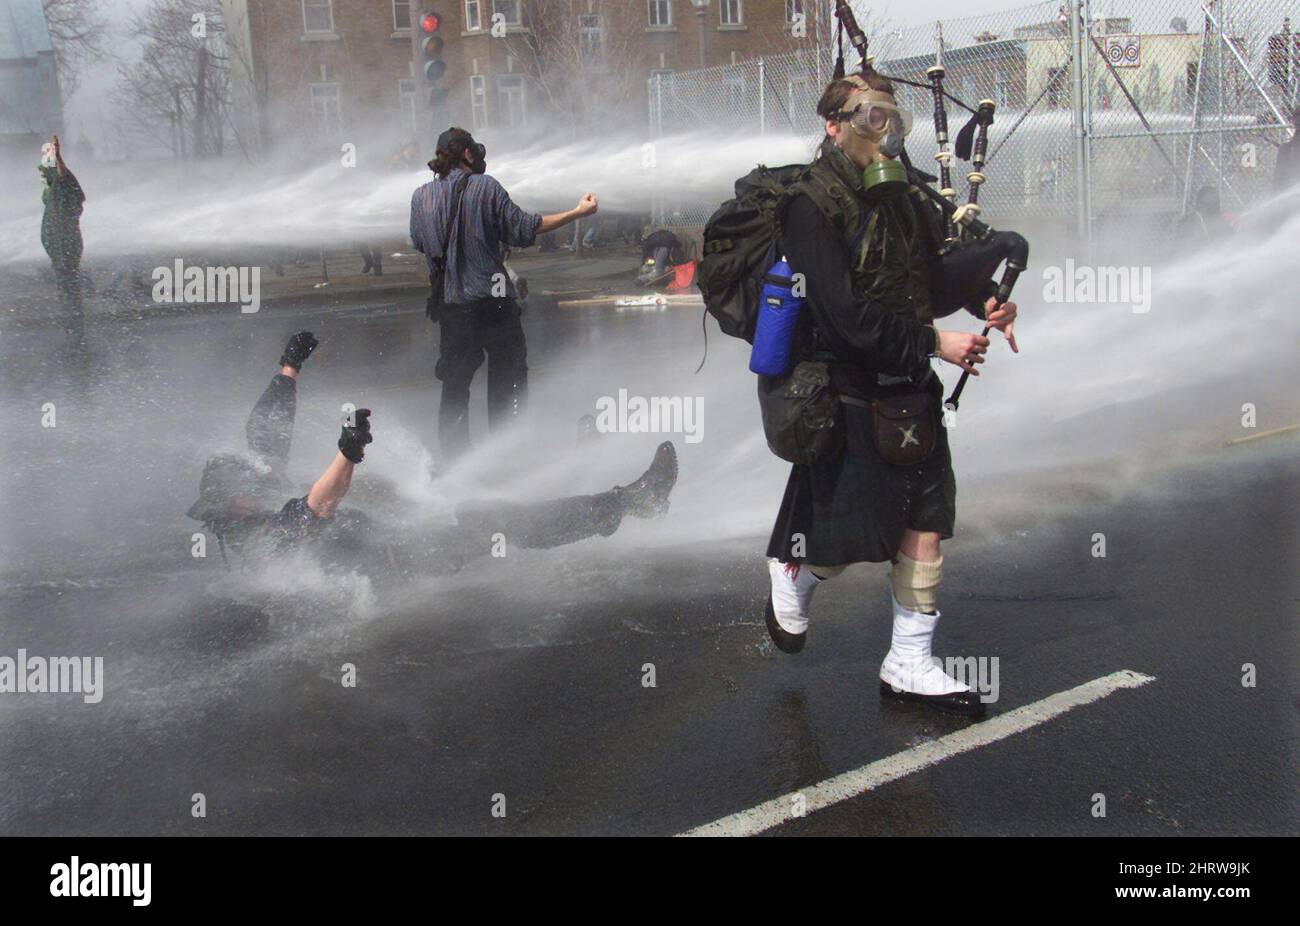 ** FILE ** In this Saturday, April 21, 2001 photograph by Canadian Press photographer Tom Hanson, a gas masked bagpiper plays his way past police water cannons as other protesters are sprayed outside the site of the Summit of the Americas in Quebec City. Award-winning Canadian Press photojournalist Hanson, a fierce champion of journalistic rights whose sometimes brusque manner belied a devoted husband with a gentle soul, died suddenly Tuesday, March 10, 2009 after collapsing while playing hockey. (AP Photo/The Canadian Press, Tom Hanson) Stock Photo